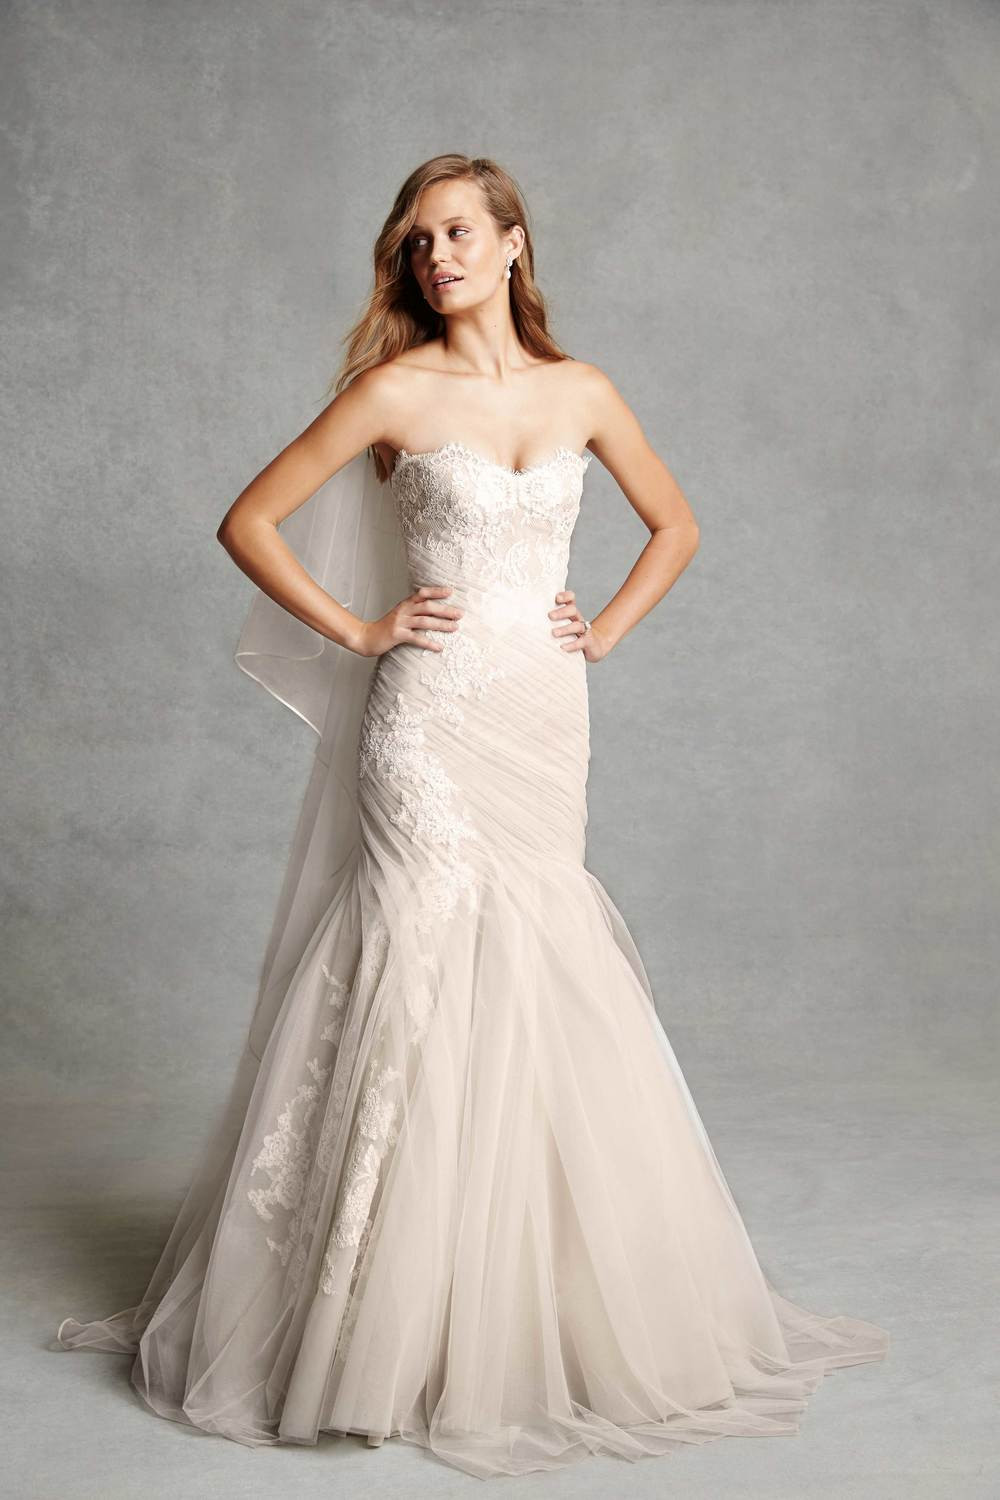 Wedding Gowns Tampa
 BLISS Monique Lhuillier BL1516 Strapless Sweetheart Lace